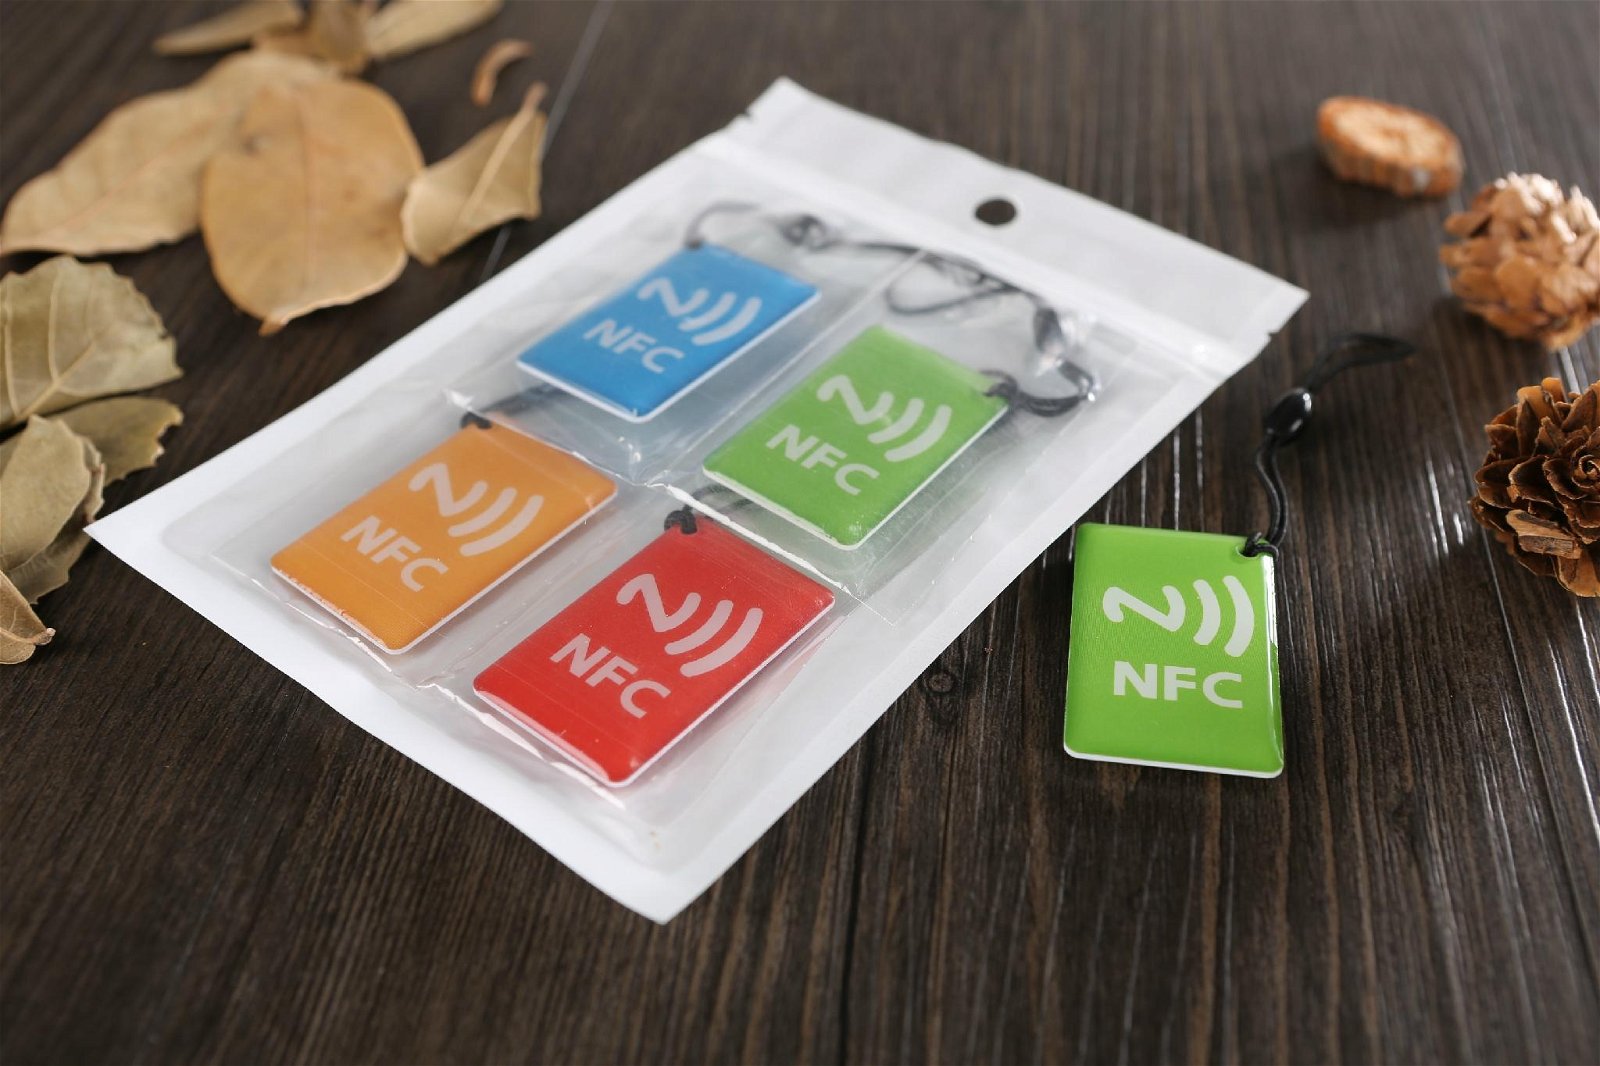 Waterproof Ntag203 NFC Smart Tags for Samsung Note3 S4 Nokia Lumia 920 Oppo HTC 4